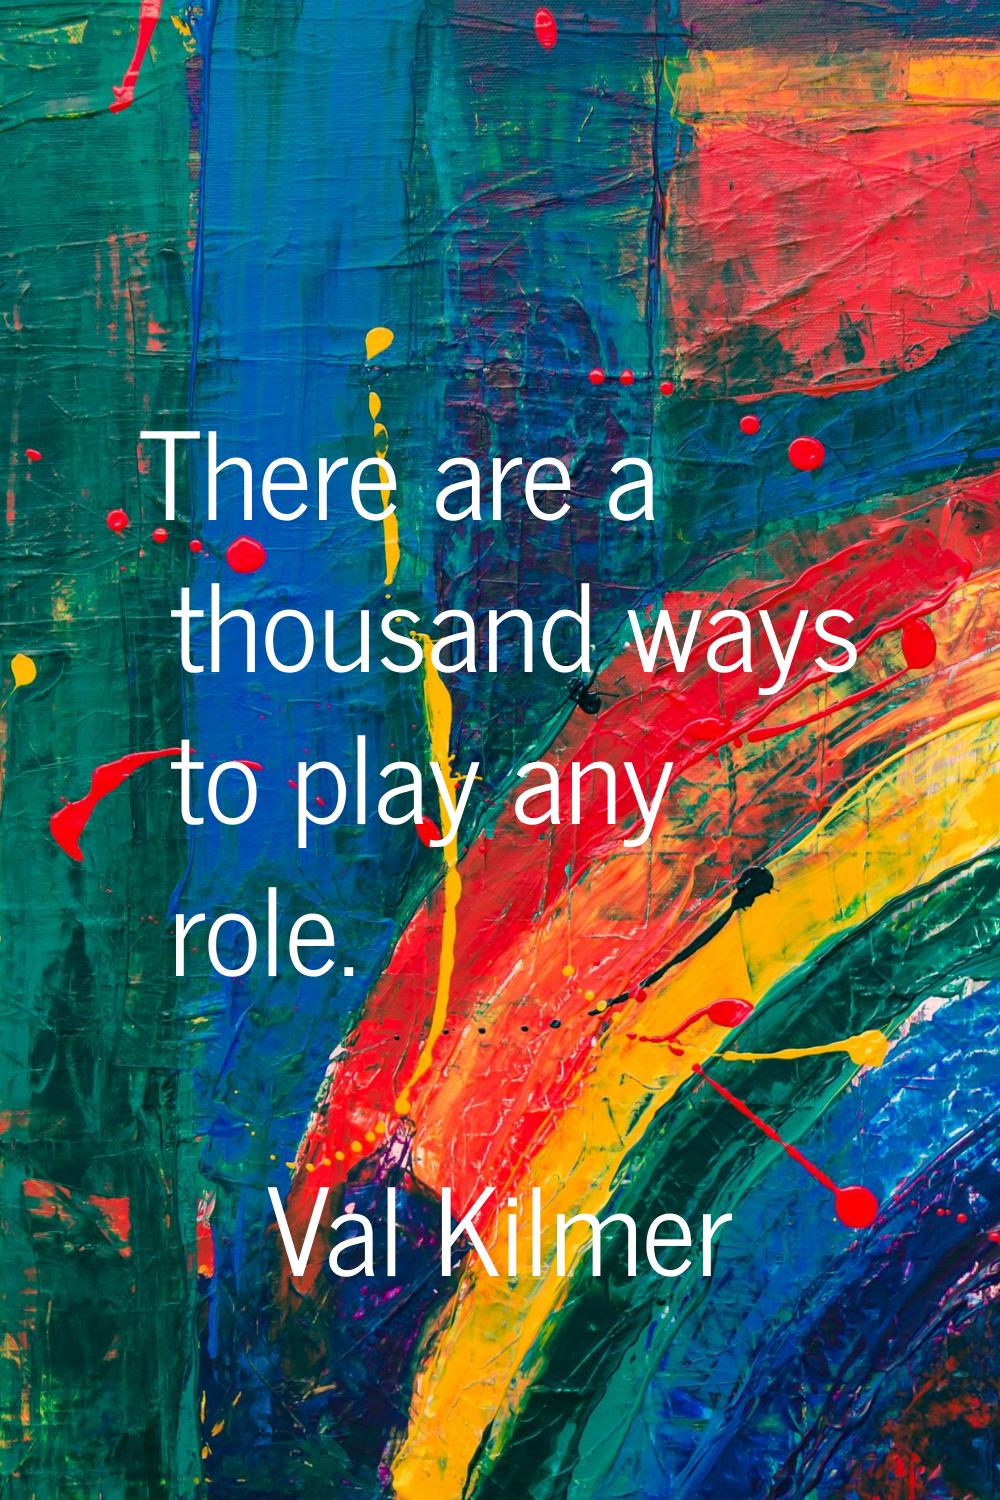 There are a thousand ways to play any role.